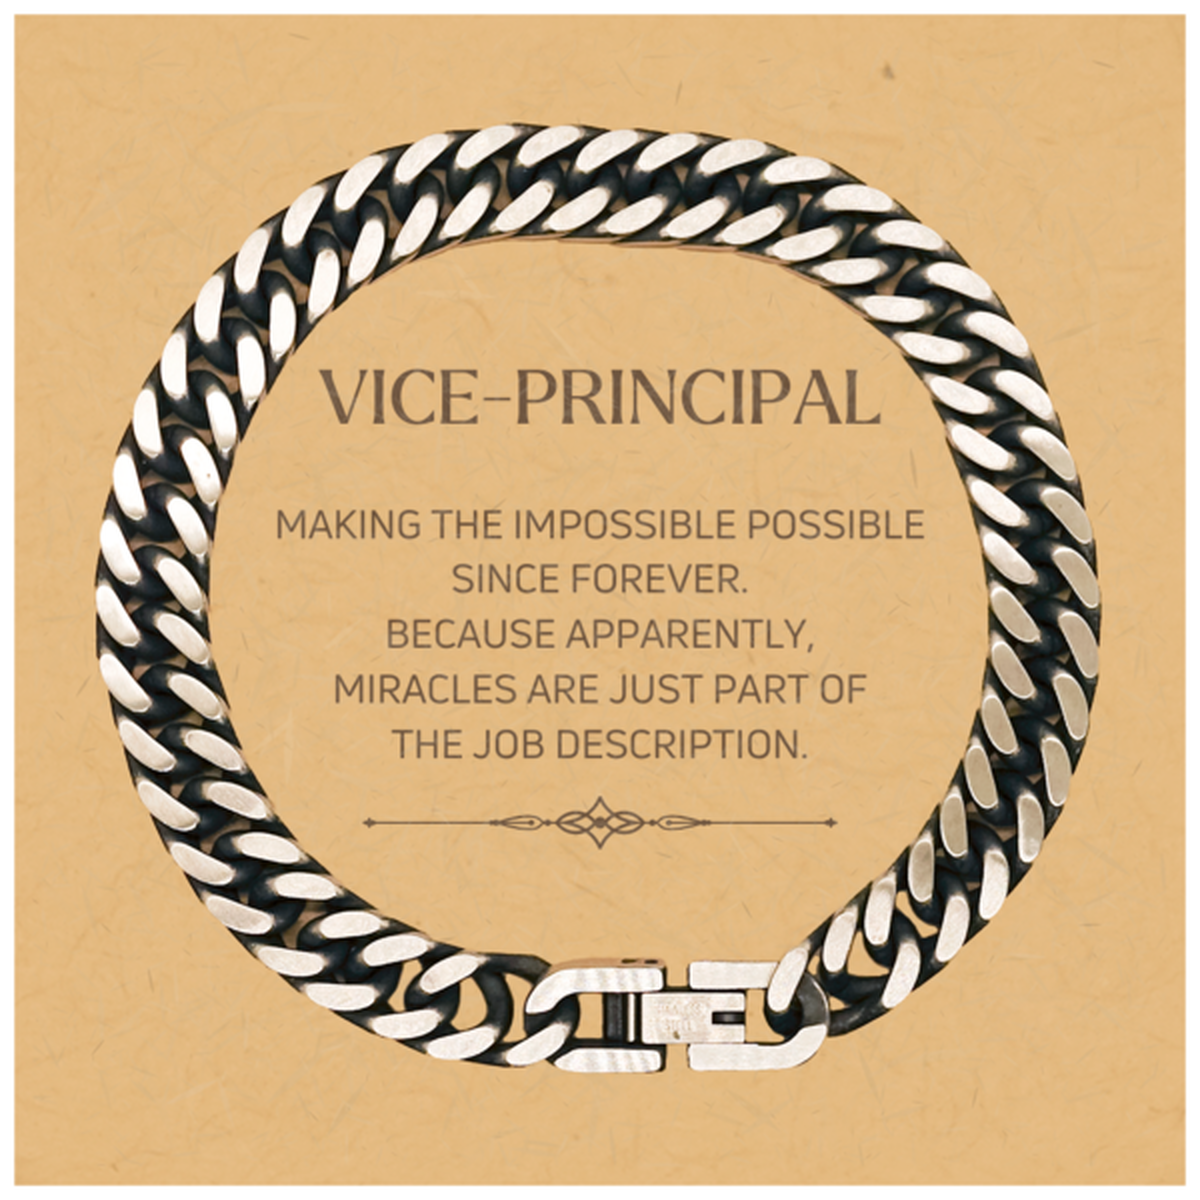 Funny Vice-principal Gifts, Miracles are just part of the job description, Inspirational Birthday Christmas Cuban Link Chain Bracelet For Vice-principal, Men, Women, Coworkers, Friends, Boss